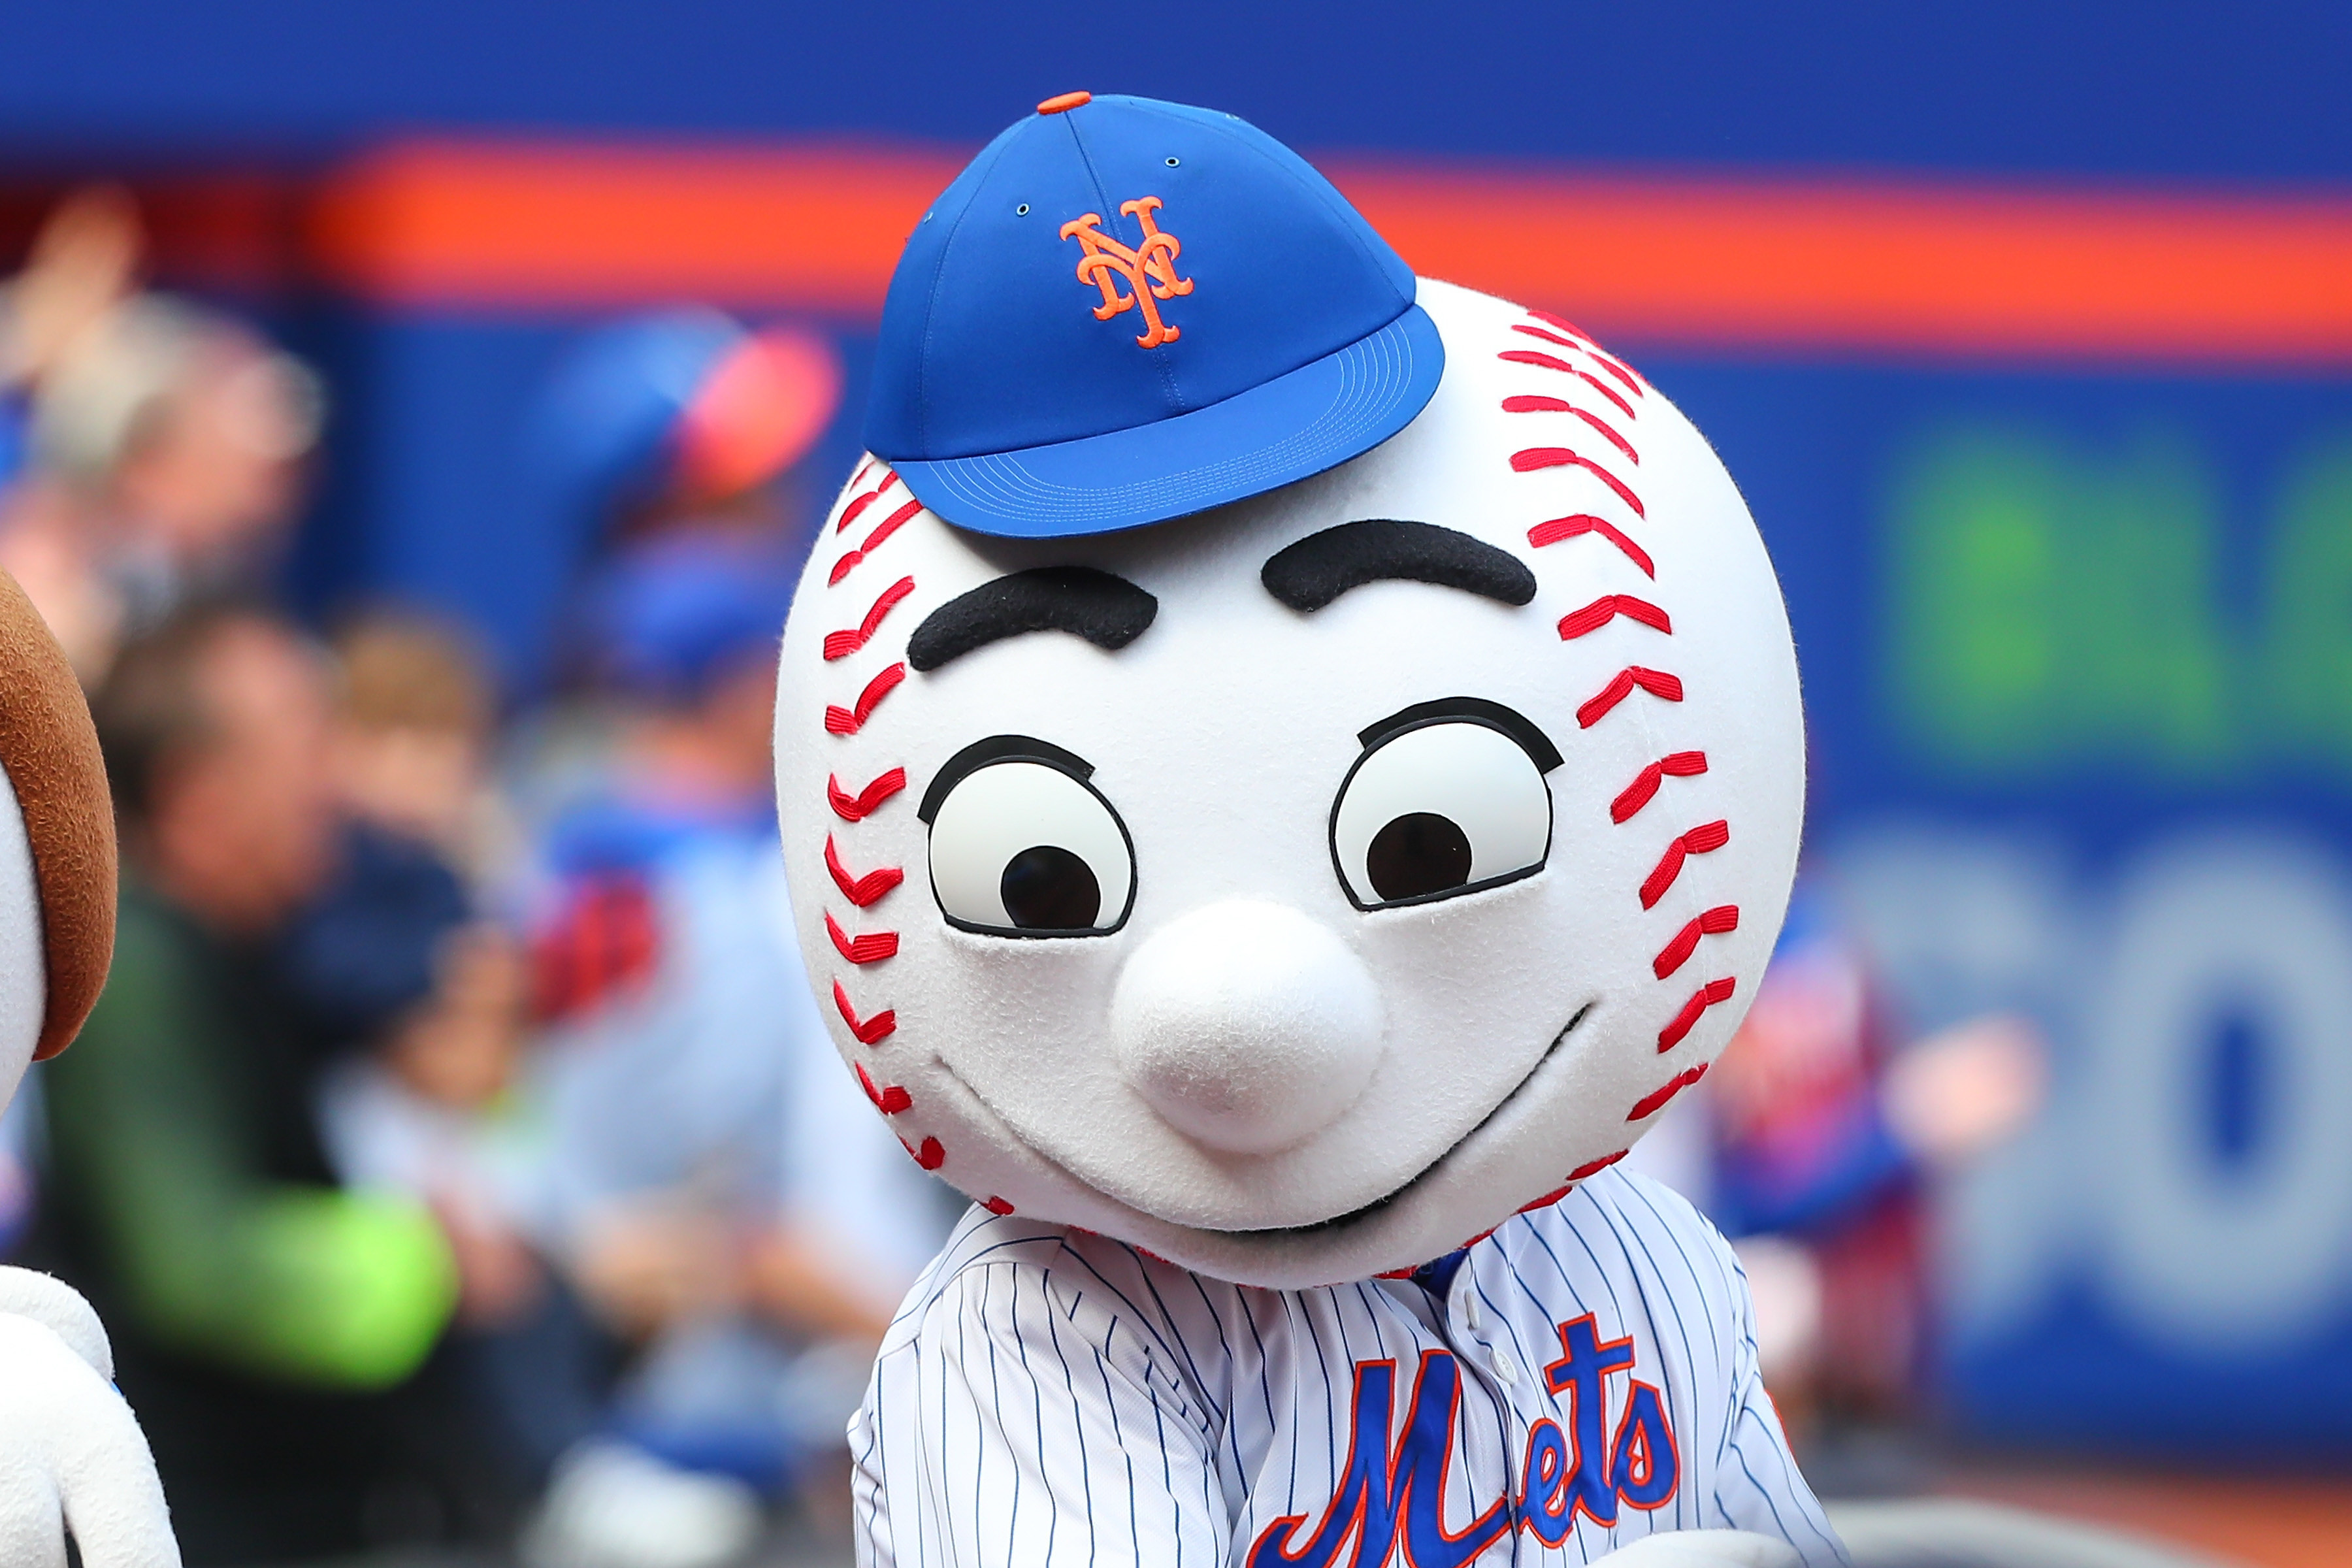 Mr. Met on Opening Day between the New York Mets and the Atlanta Braves on April 3, 2017, at Citi Field in Flushing, New York. (Rich Graessle—Icon Sportswire/Getty Images)